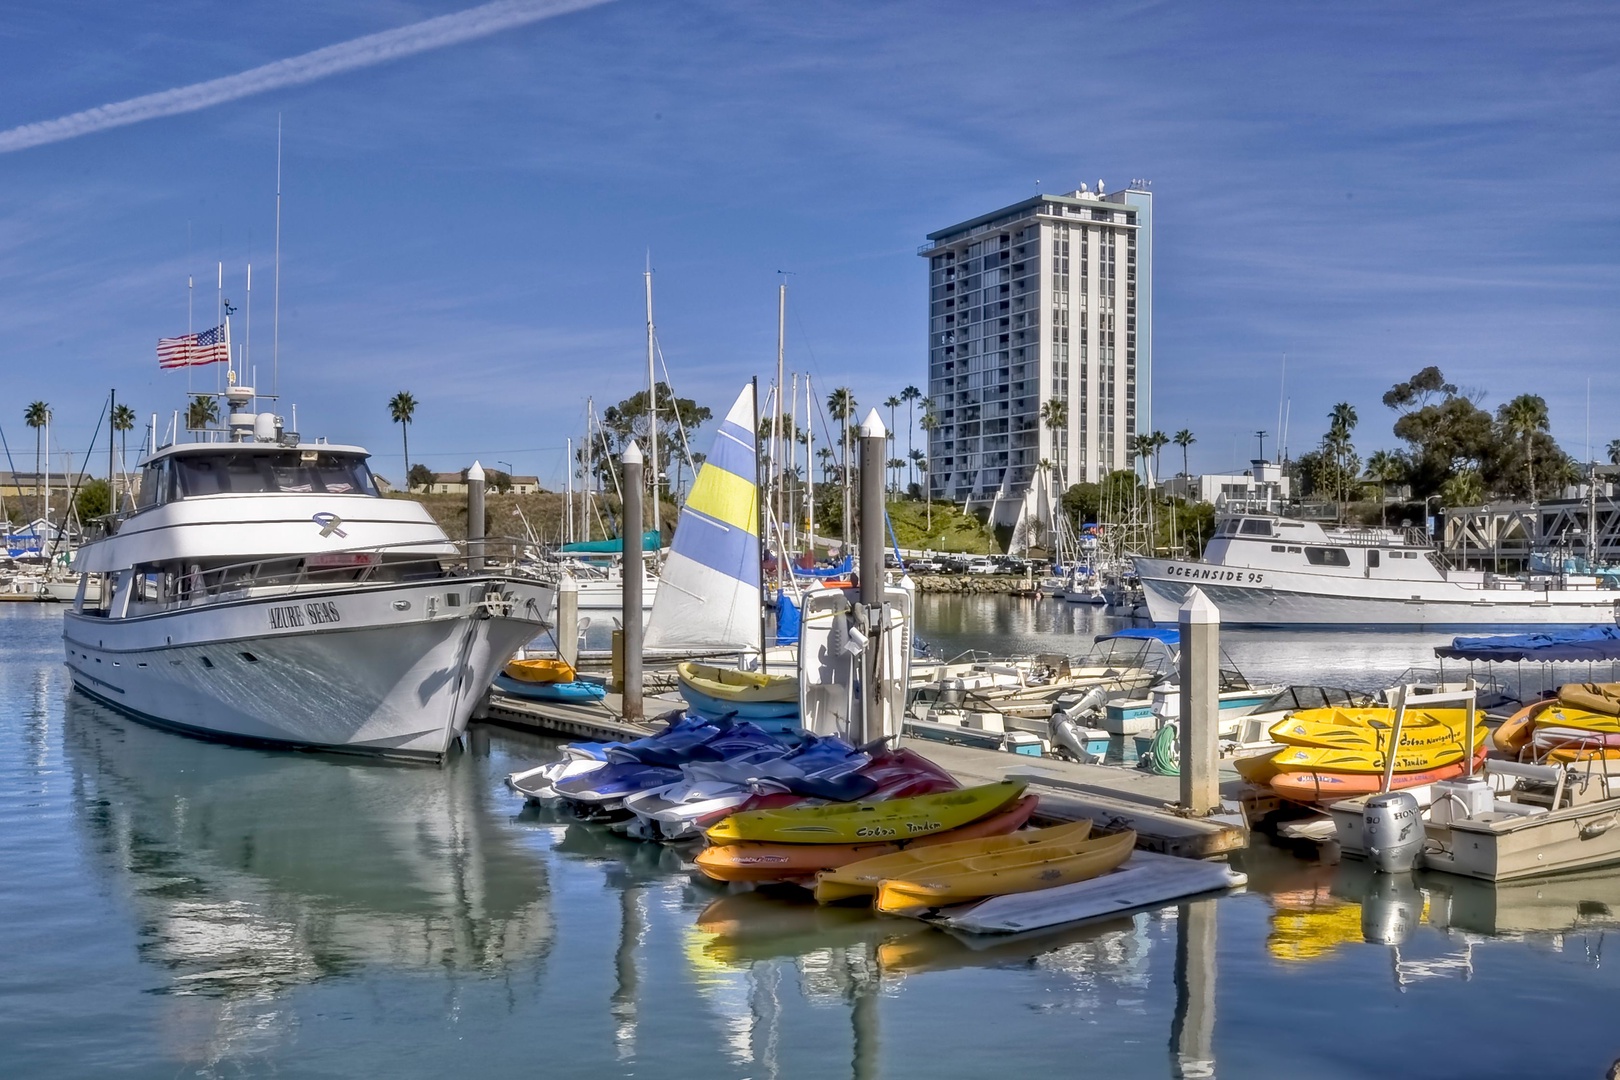 Explore local attractions such as the Oceanside Harbor